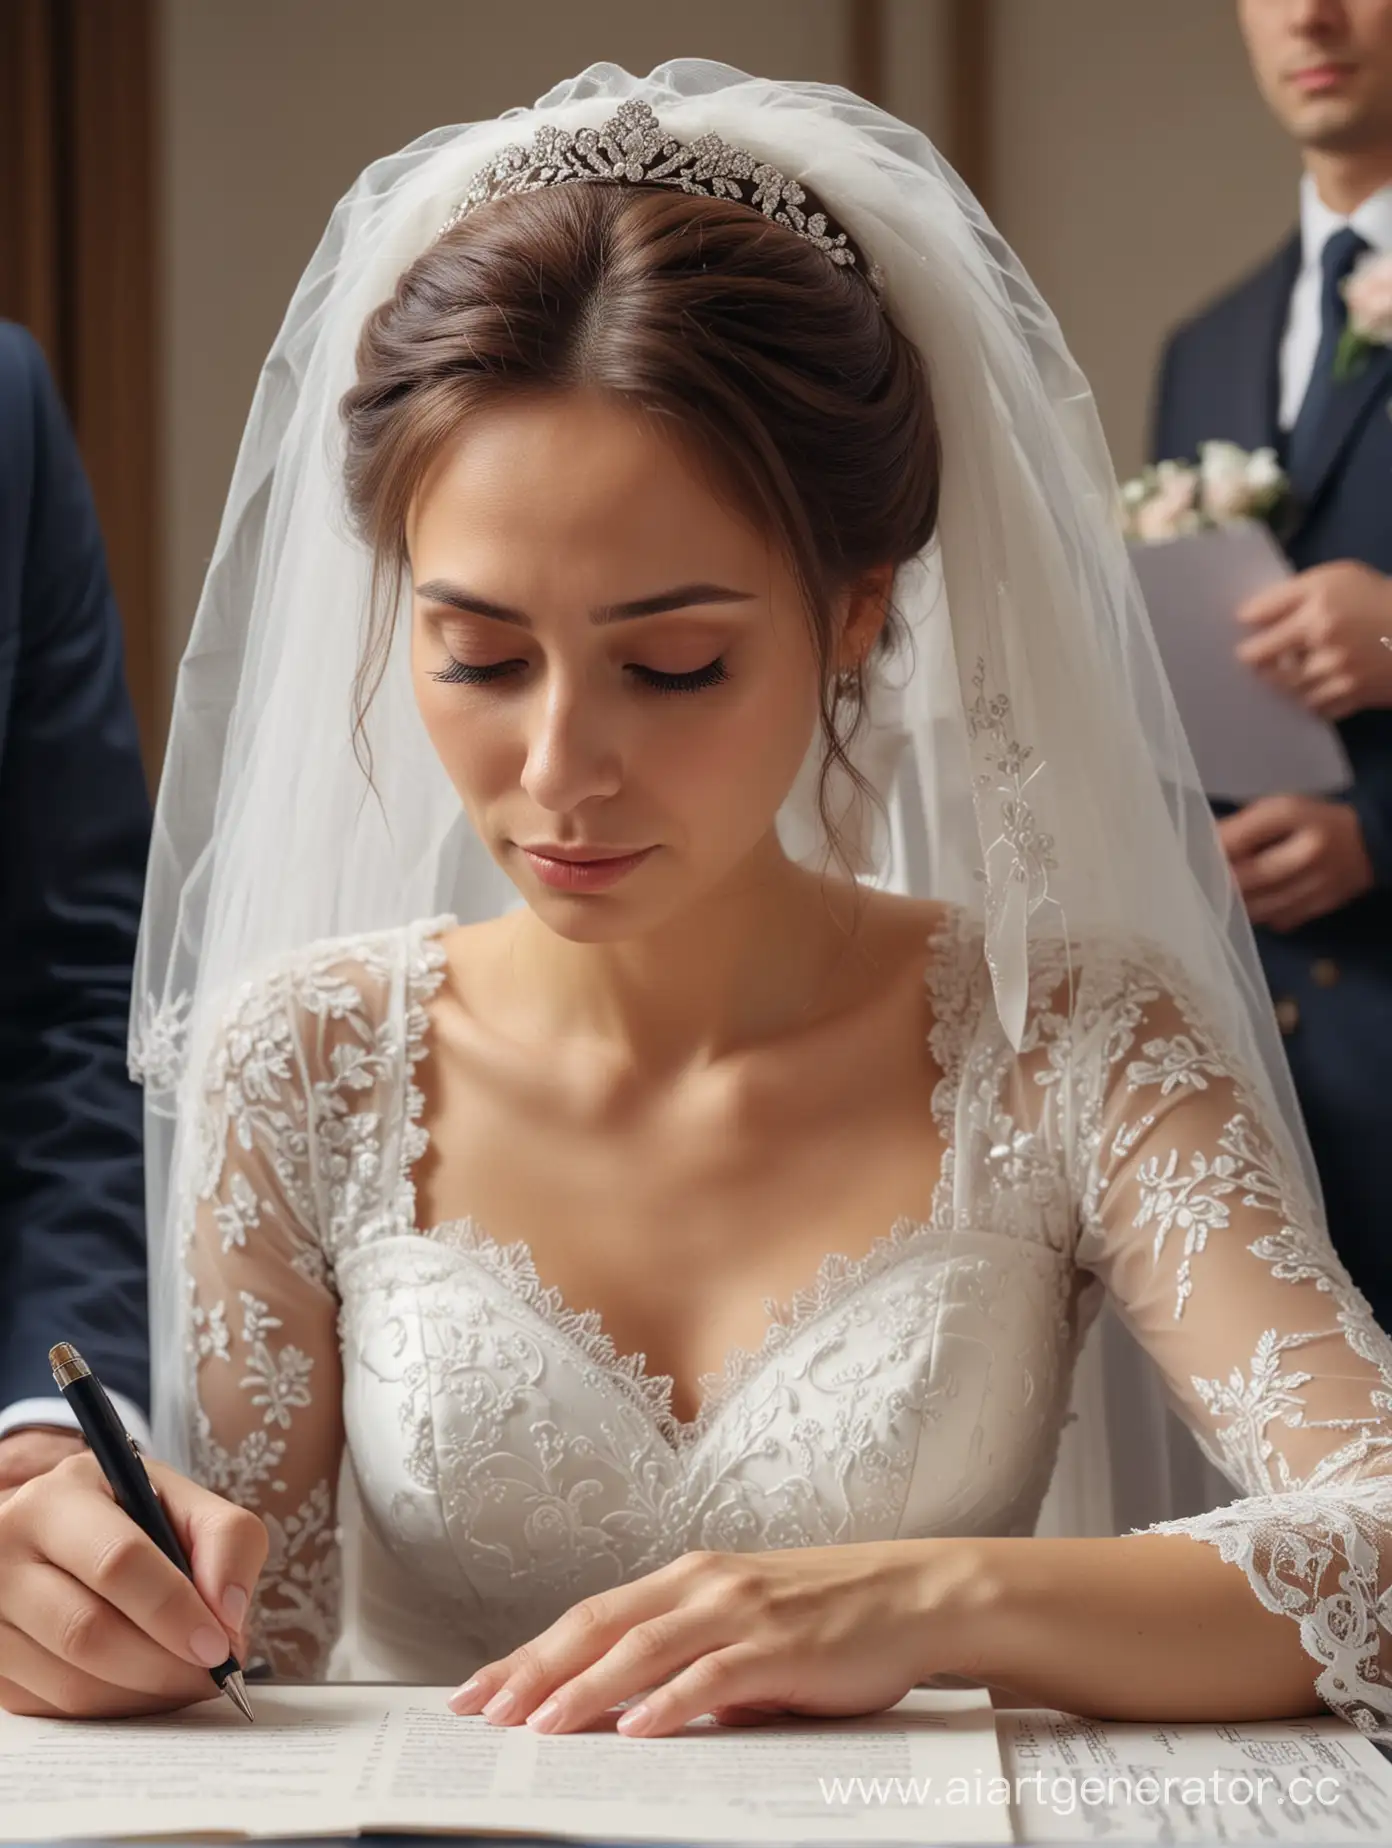 Sad-Bride-Signing-Marriage-Contract-from-Grooms-Mother-Emotional-Wedding-Moment-8K-Clear-Photo